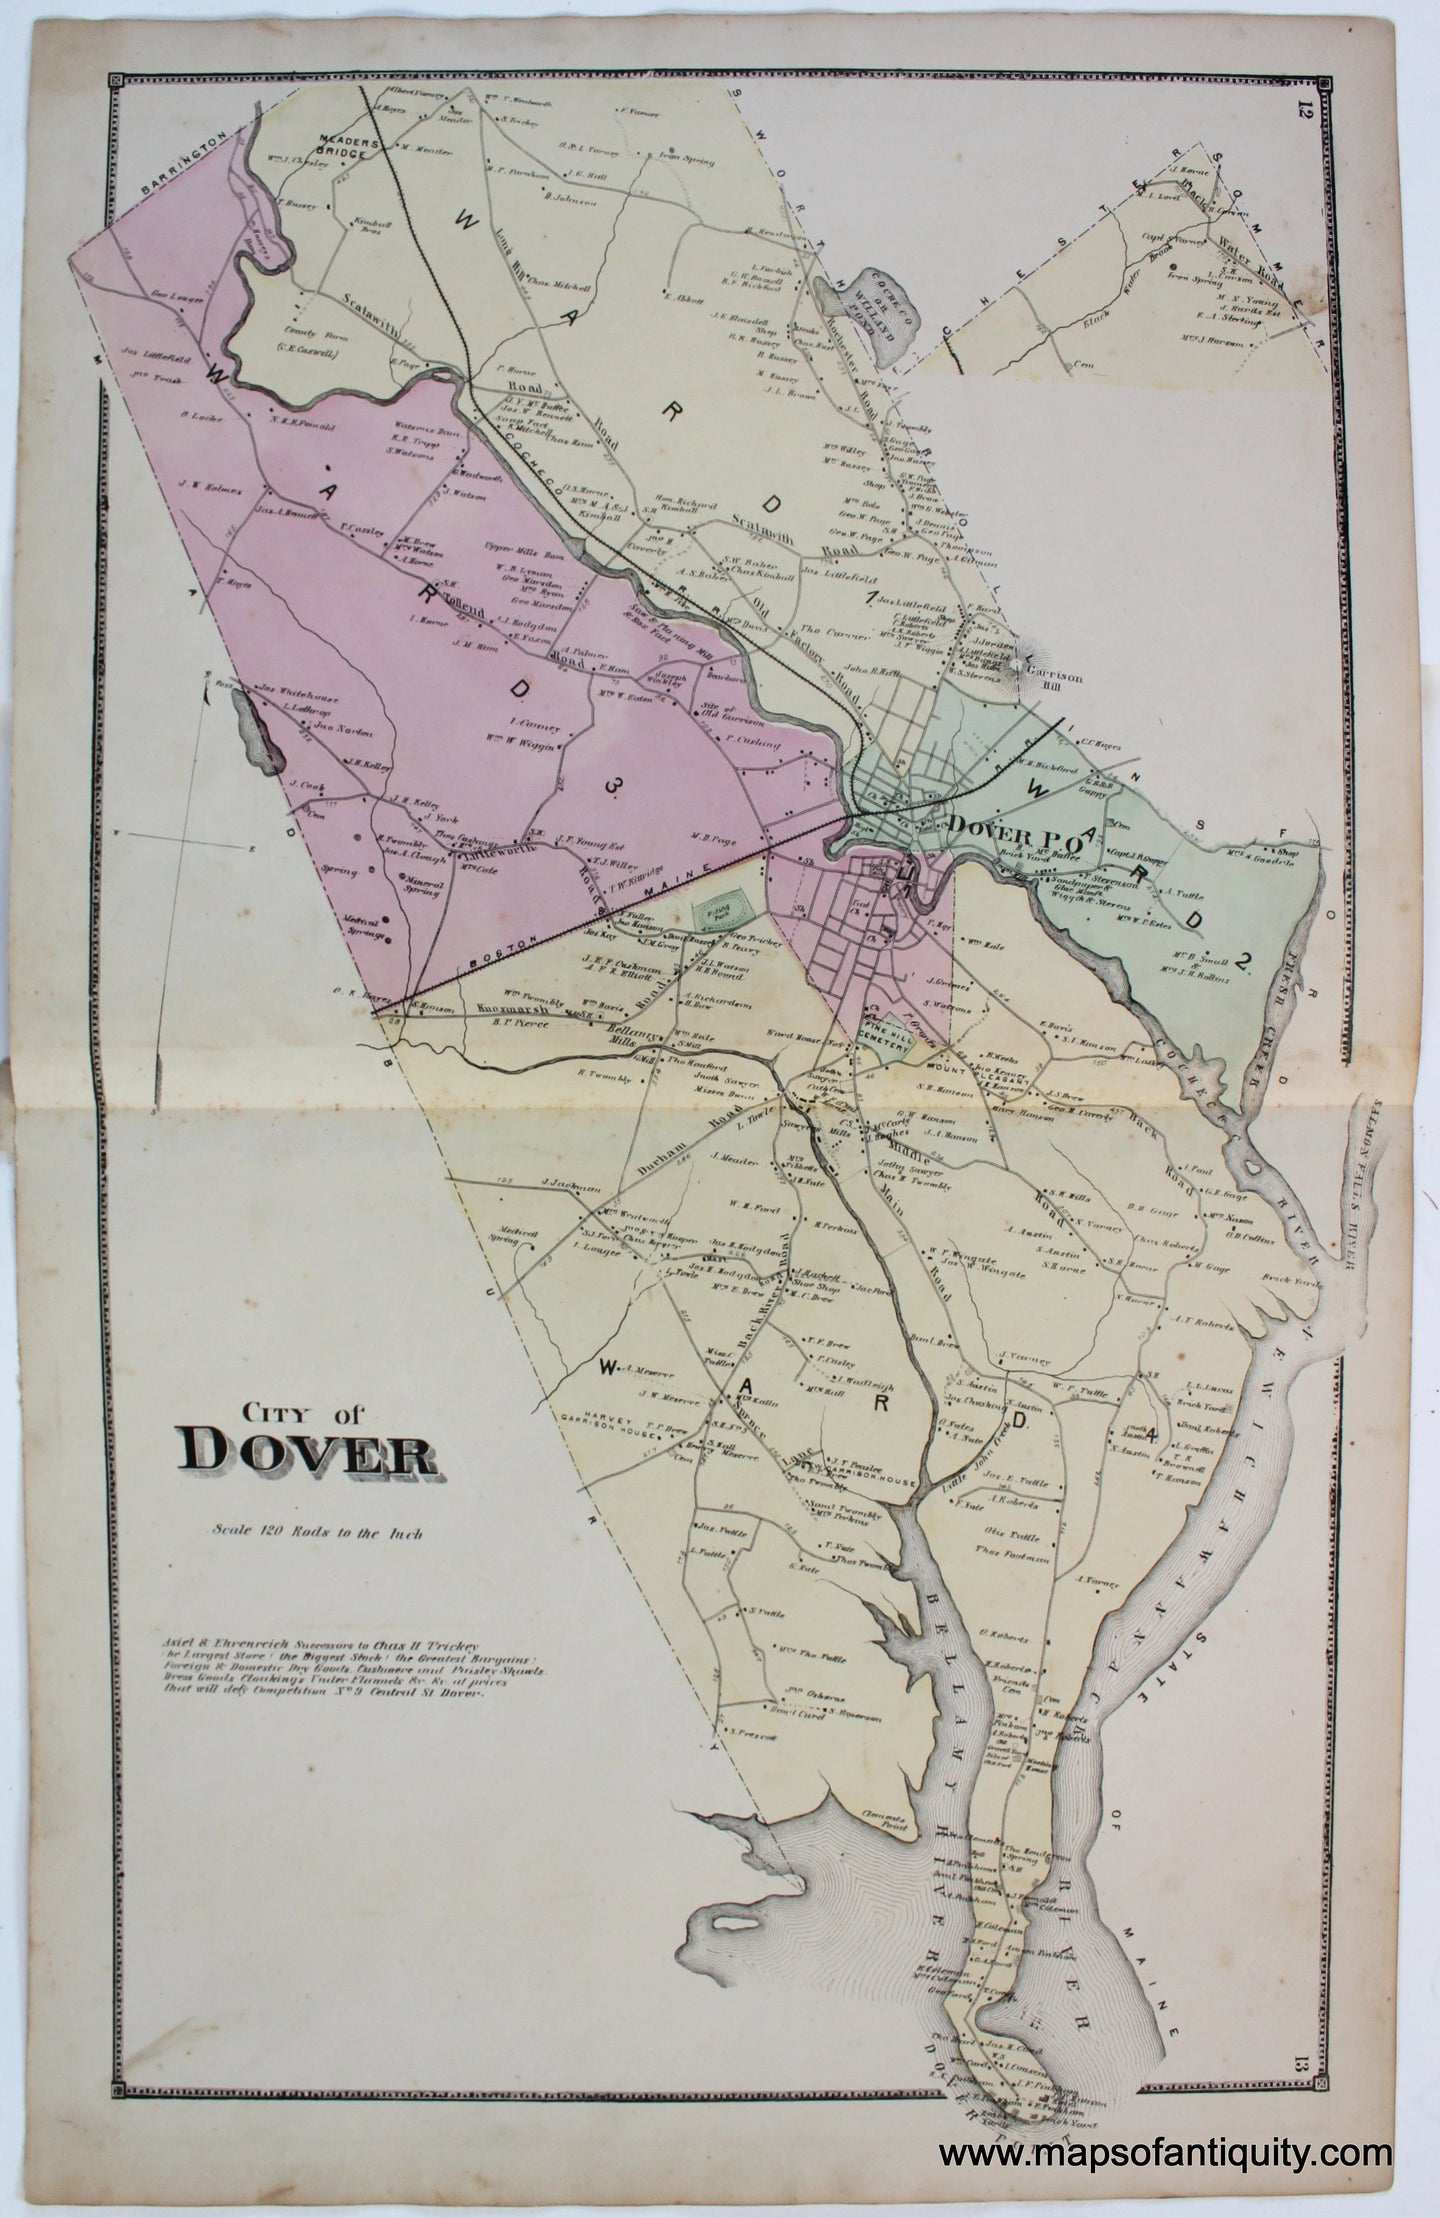 Antique-Map-City-of-Dover-Strafford-County-Town-Towns-New-Hampshire-NH-Sanford-Everts-1871-1870s-1800s-Mid-Late-19th-Century-Maps-of-Antiquity